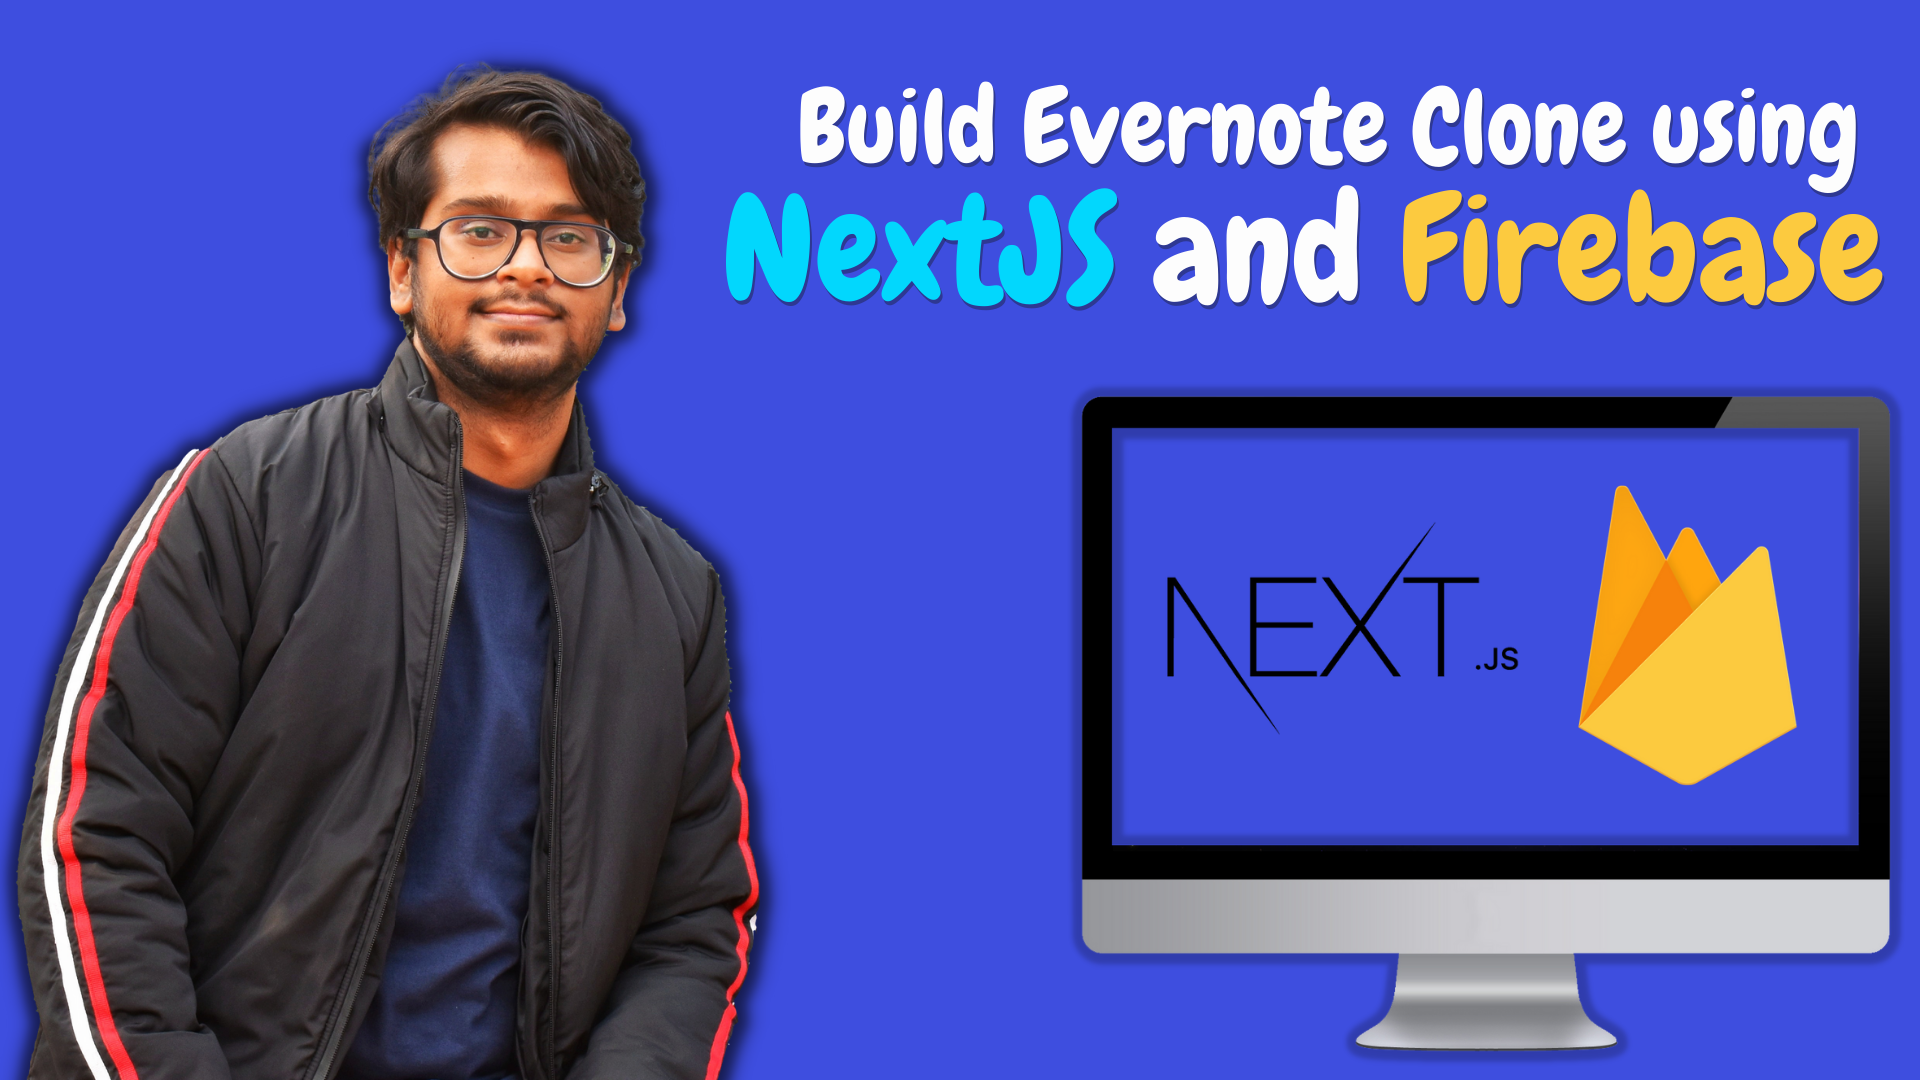 Next.js and Firebase Tutorial – How to Build an Evernote Clone